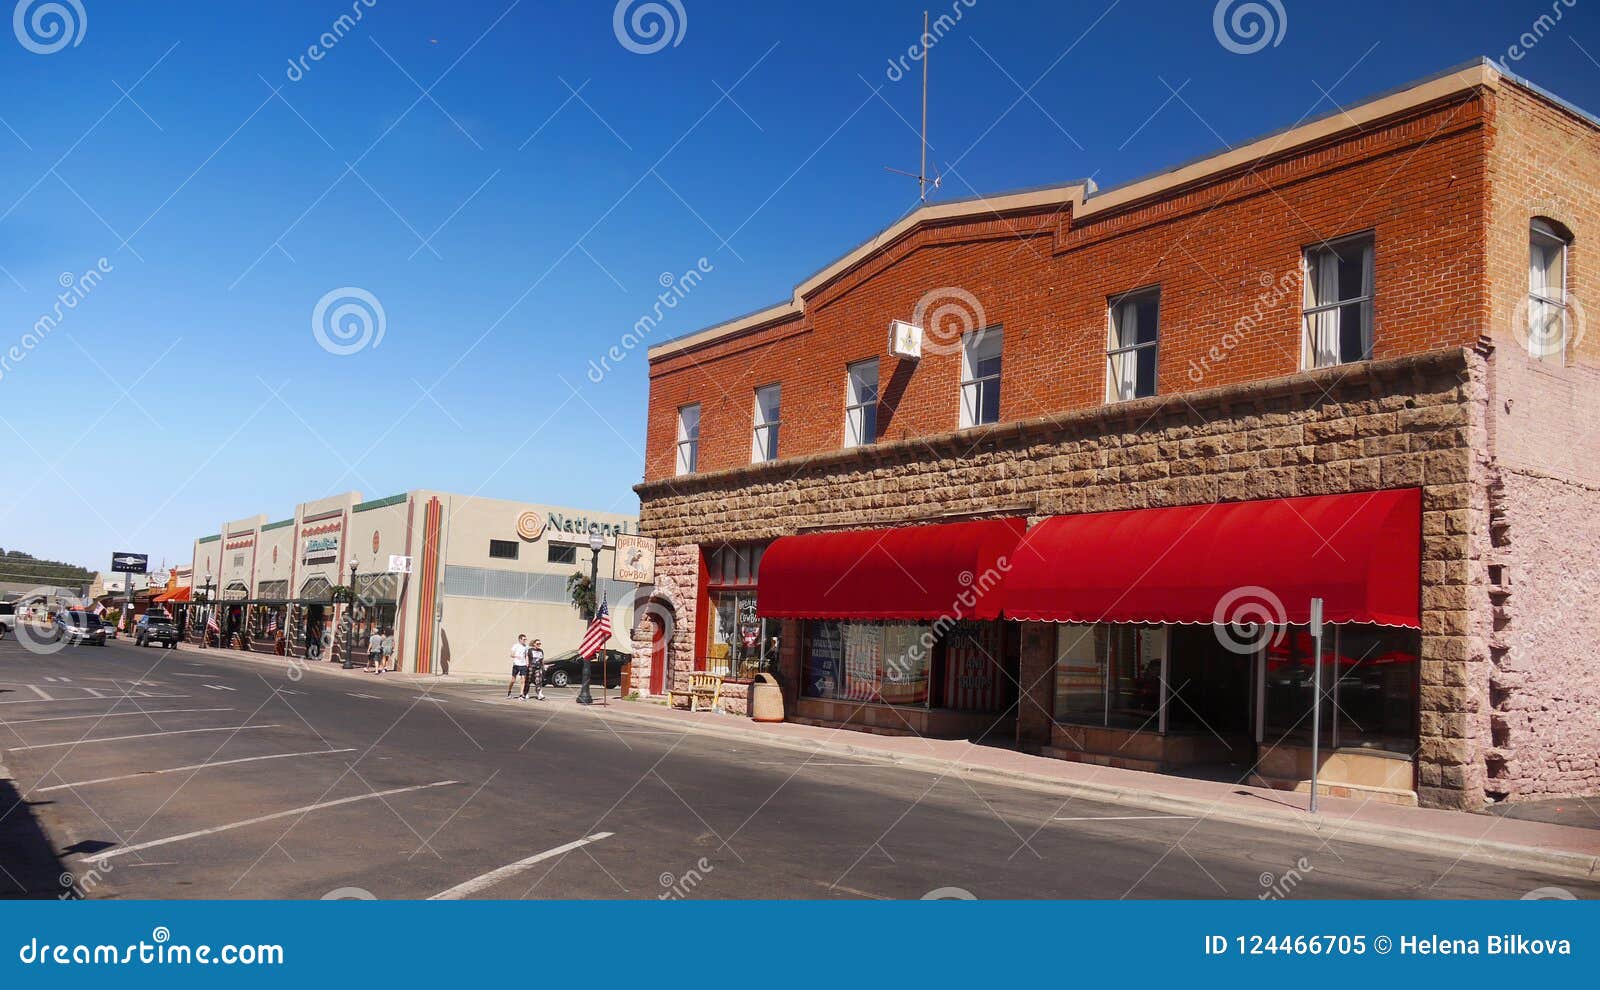 Route 66 Williams Main Street, Arizona America Editorial Image - Image of  route, attraction: 124466705